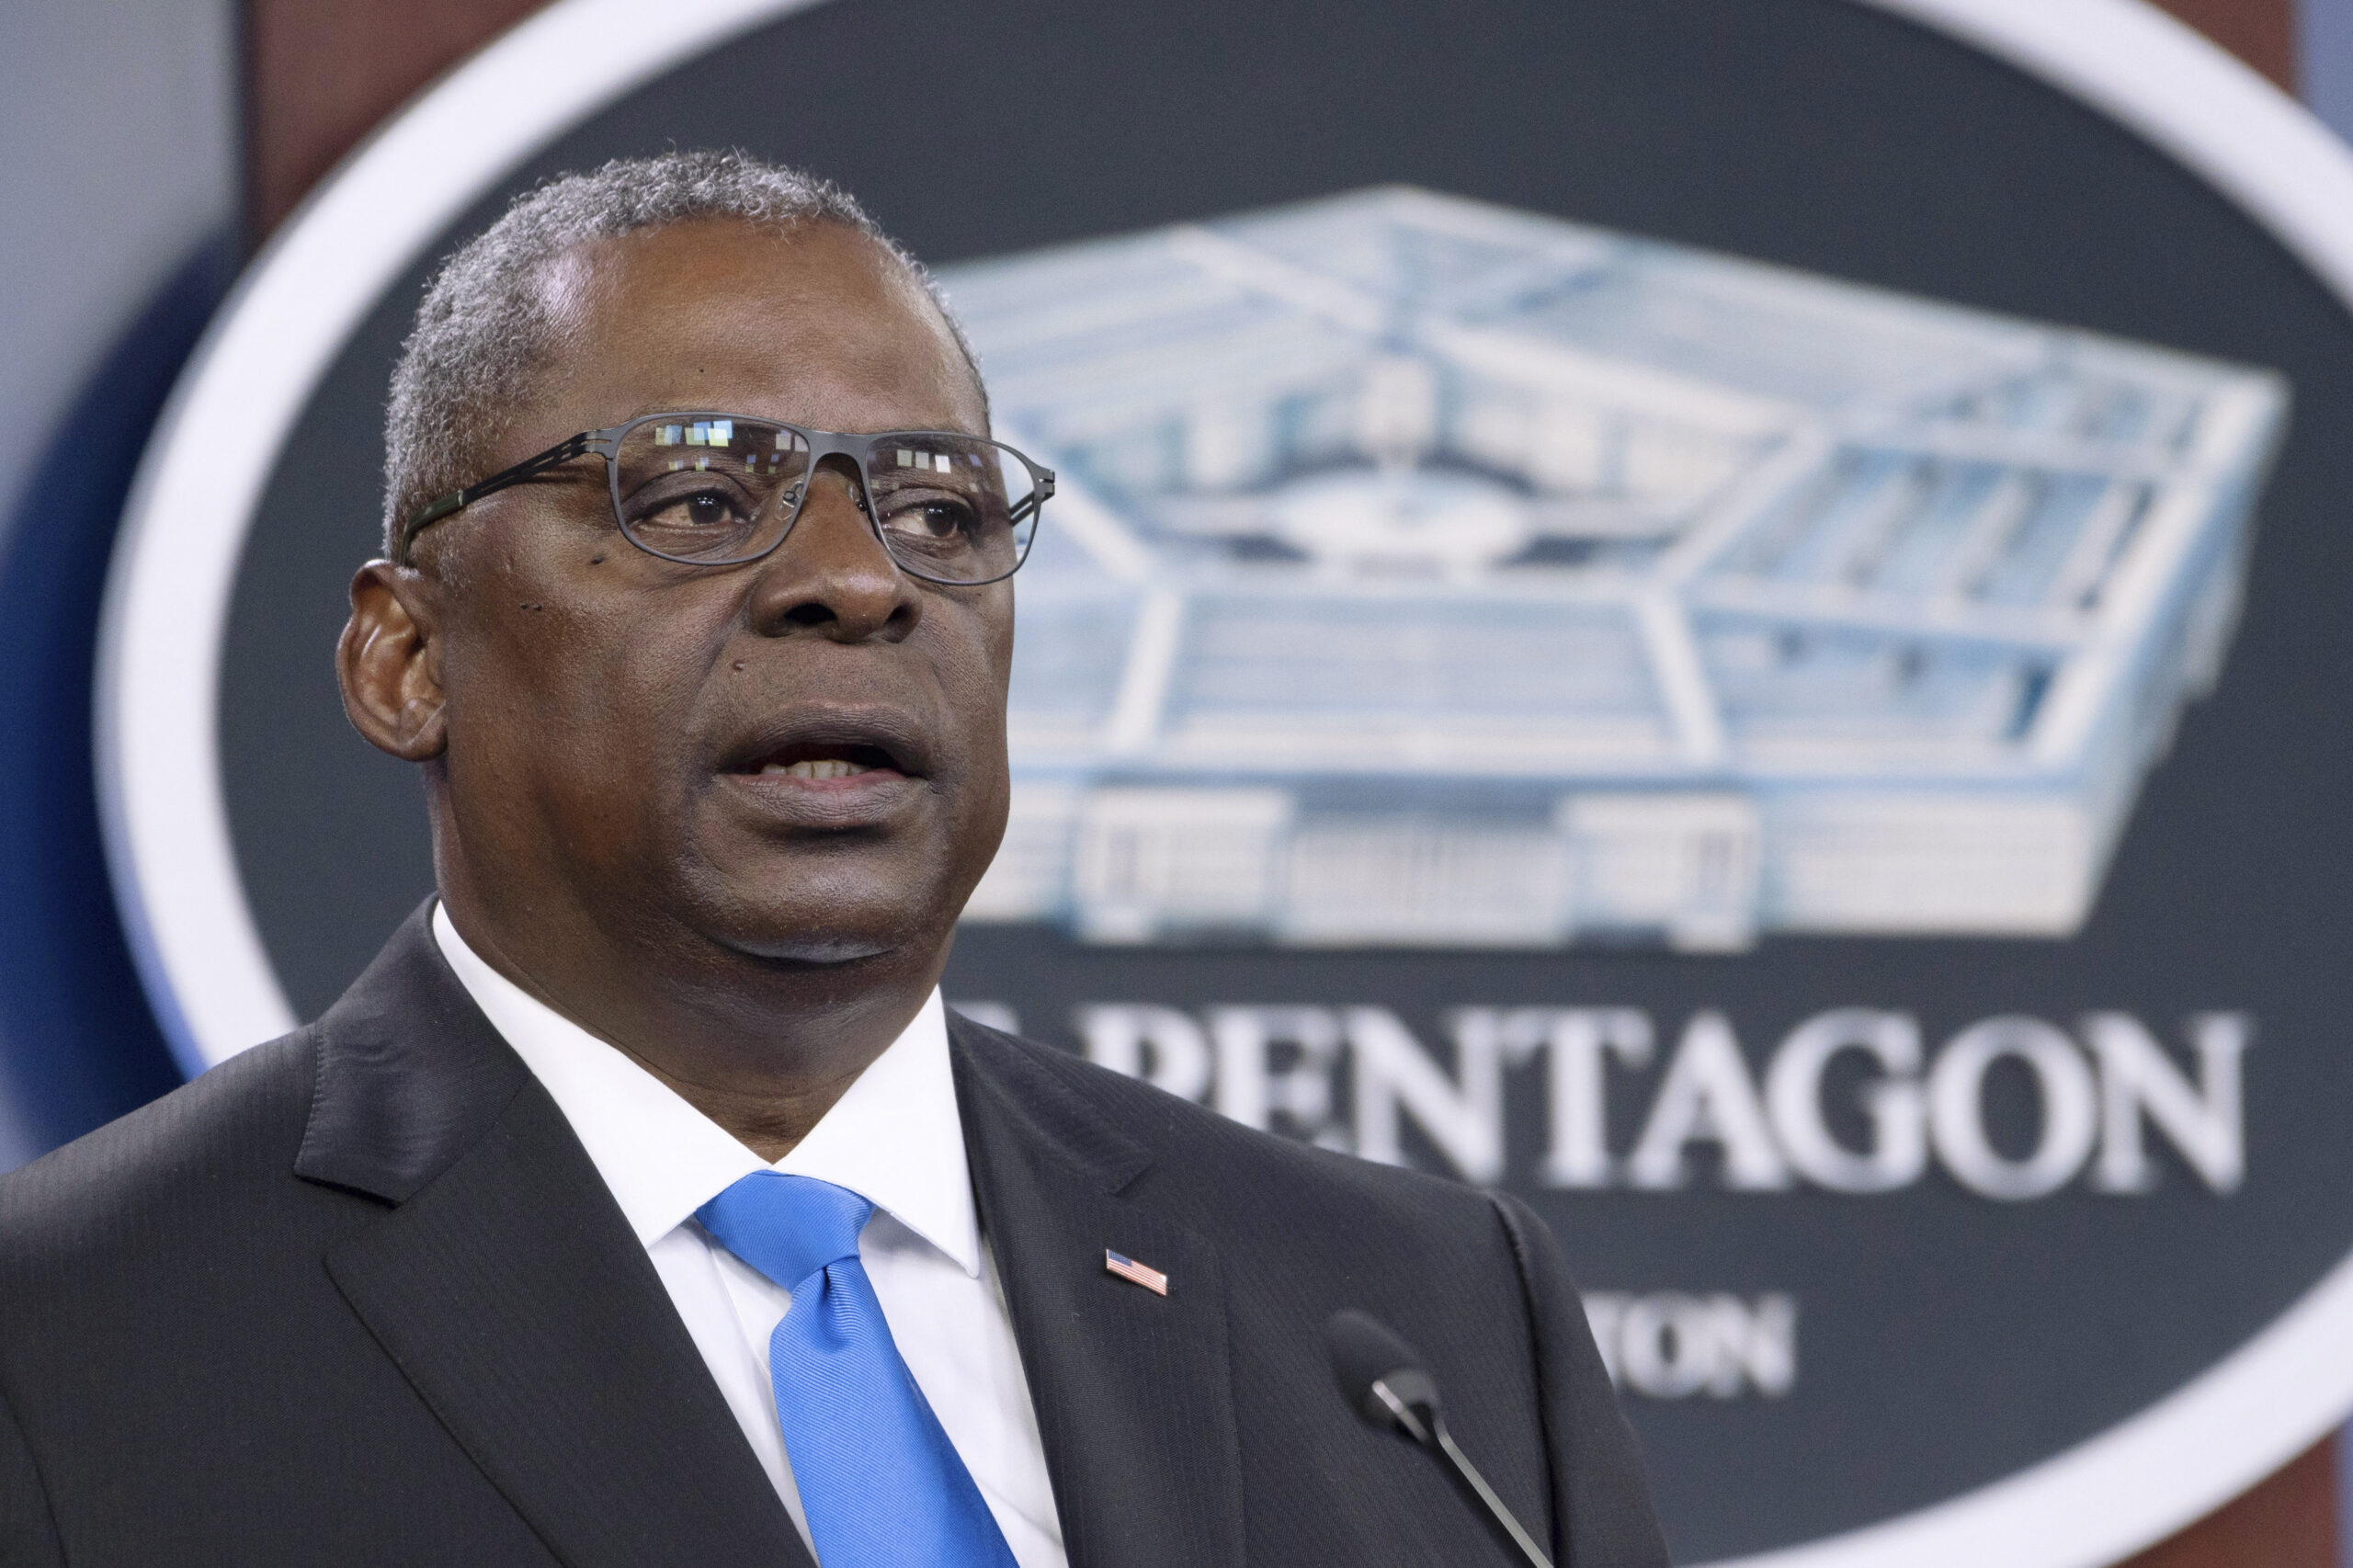 FILE - In this July 21, 2021 file photo, Defense Secretary Lloyd Austin speaks at a press briefing at the Pentagon in Washington. Austin has said he is working expeditiously to make the COVID-19 vaccine mandatory for military personnel and is expected to ask Biden to waive a federal law that requires individuals be given a choice if the vaccine is not fully licensed. (AP Photo/Kevin Wolf, File)